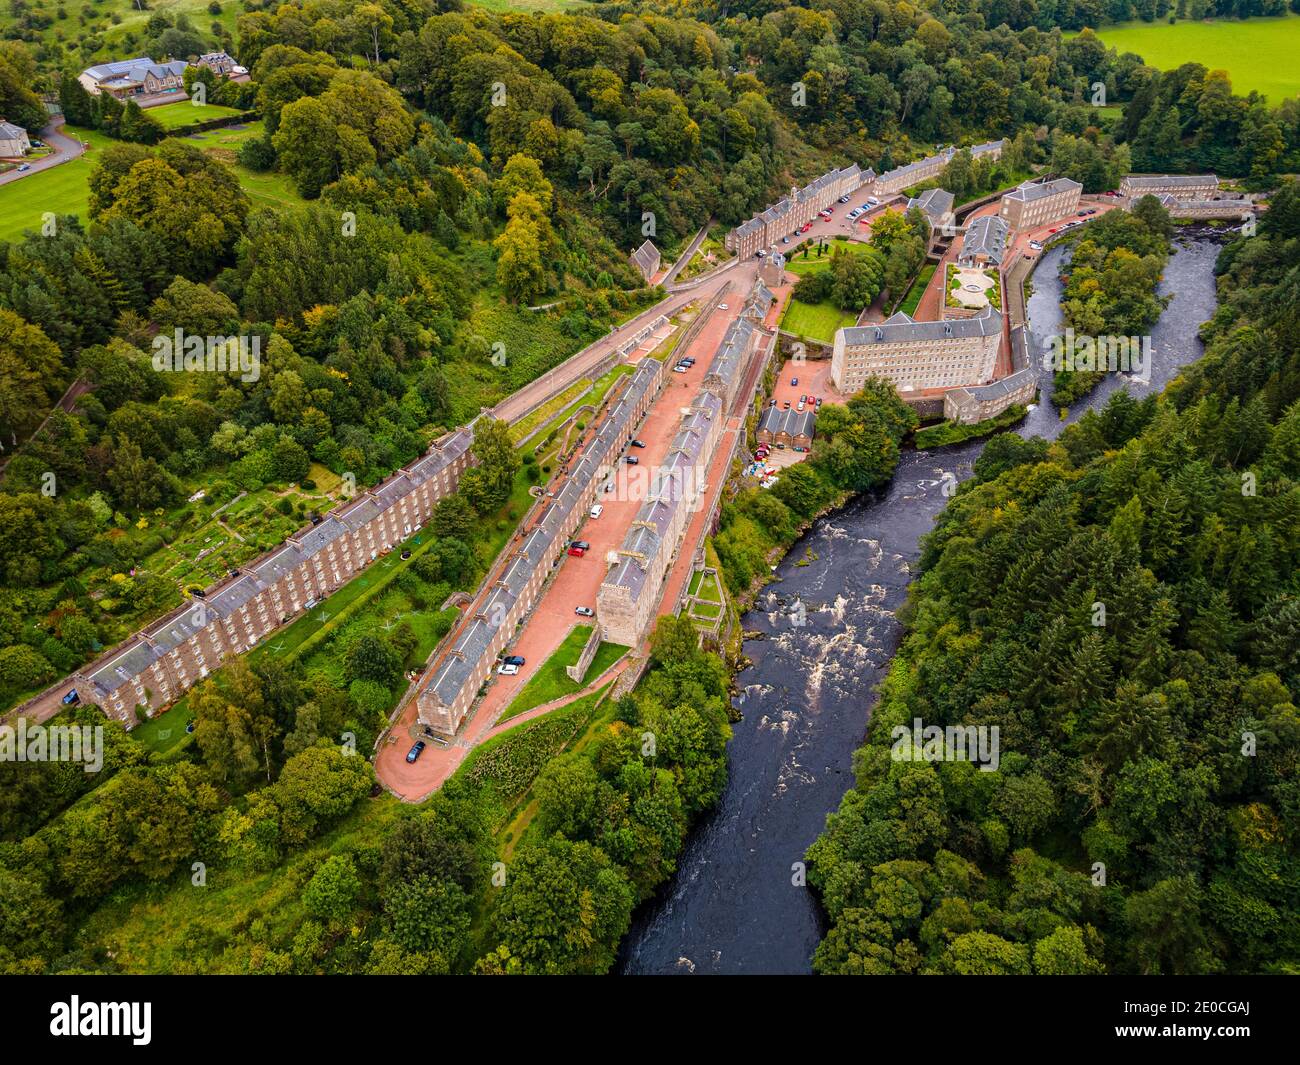 Aerial of the industrial town of New Lanark, UNESCO World Heritage Site, Scotland, United Kingdom, Europe Stock Photo